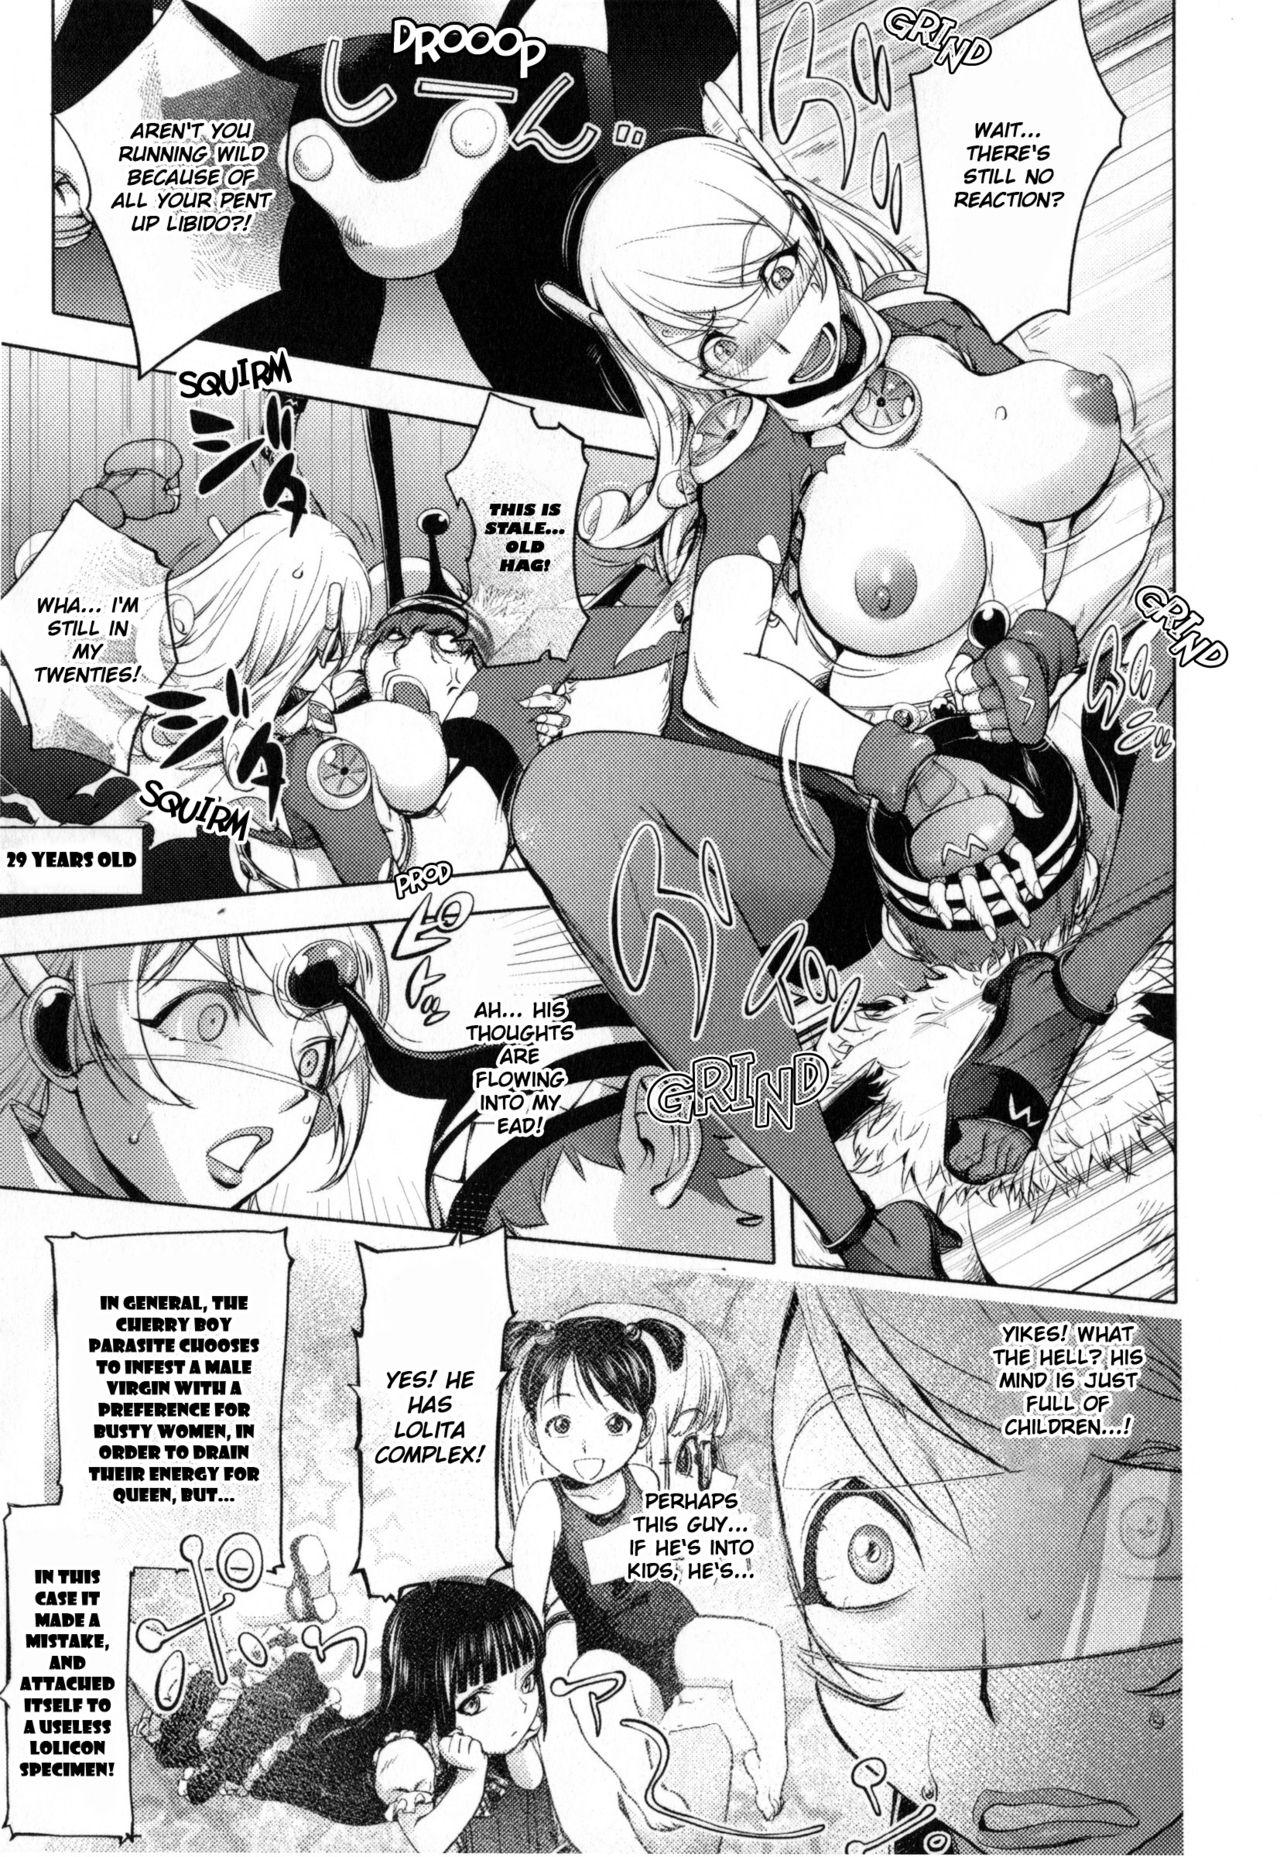 Deflowered Aisai Senshi Mighty Wife 8th | Beloved Housewife Warrior Mighty Wife 8th Granny - Page 9